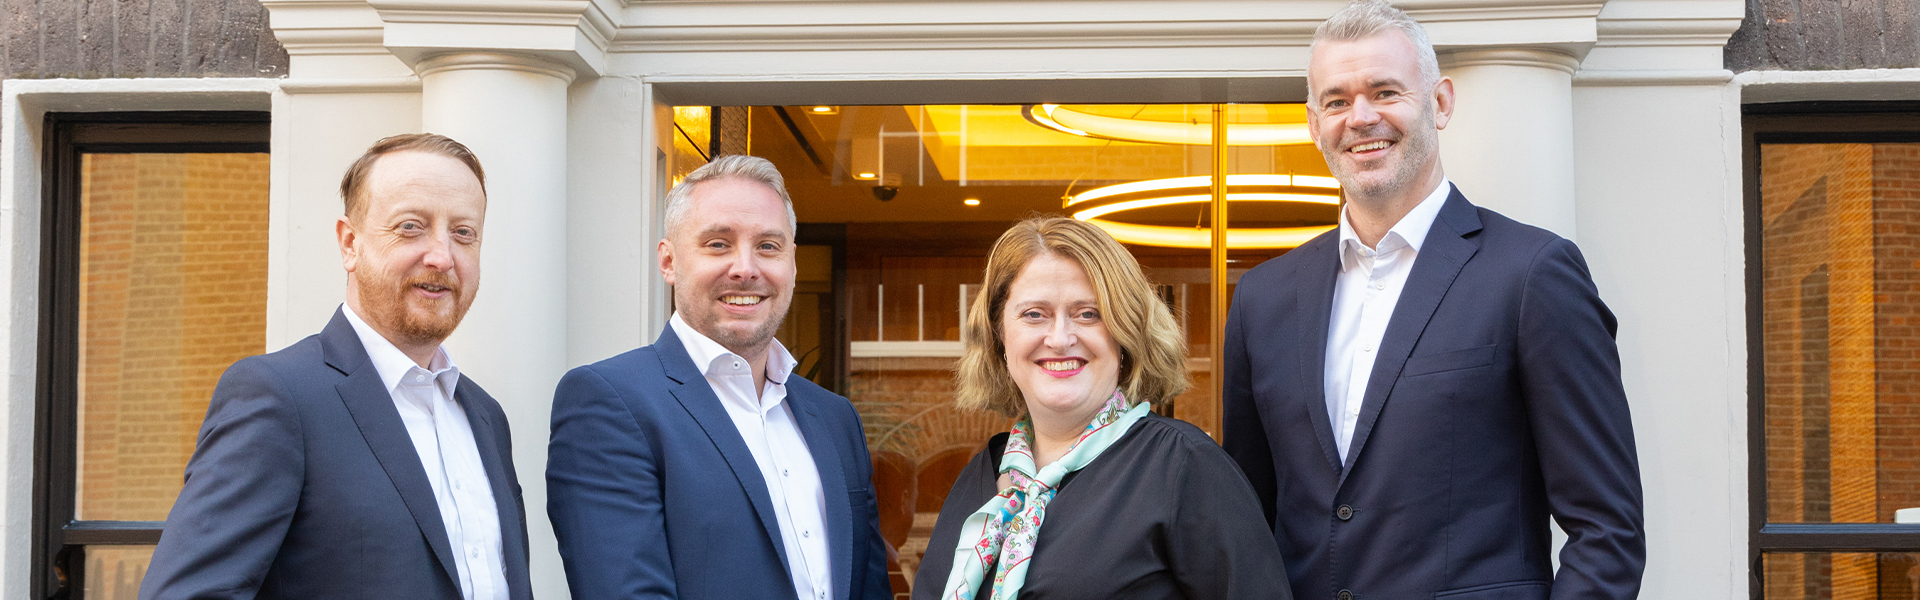 Browne Jacobson appoints new Dublin Corporate Partner amidst firm growth in the Irish market